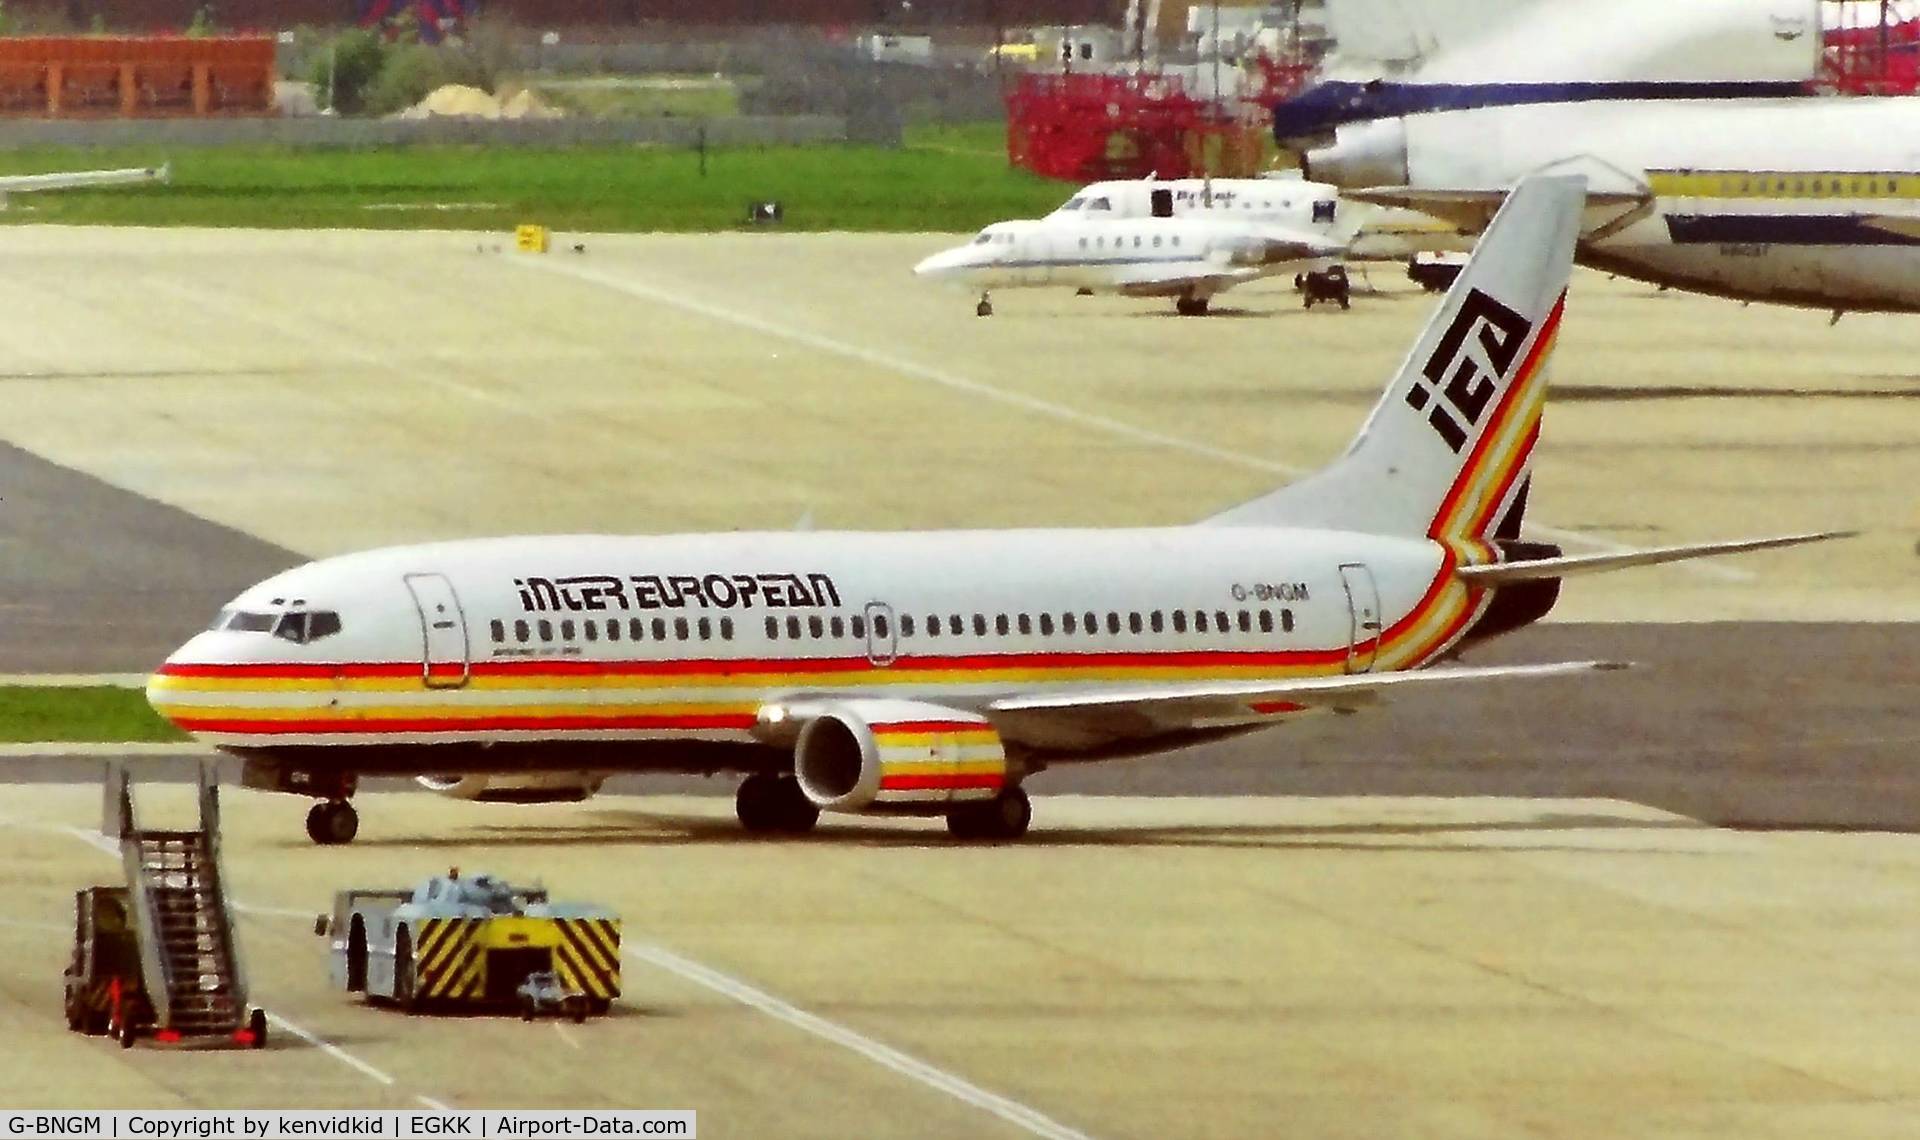 G-BNGM, 1988 Boeing 737-3Y0 C/N 23925, At London Gatwick early 1992.